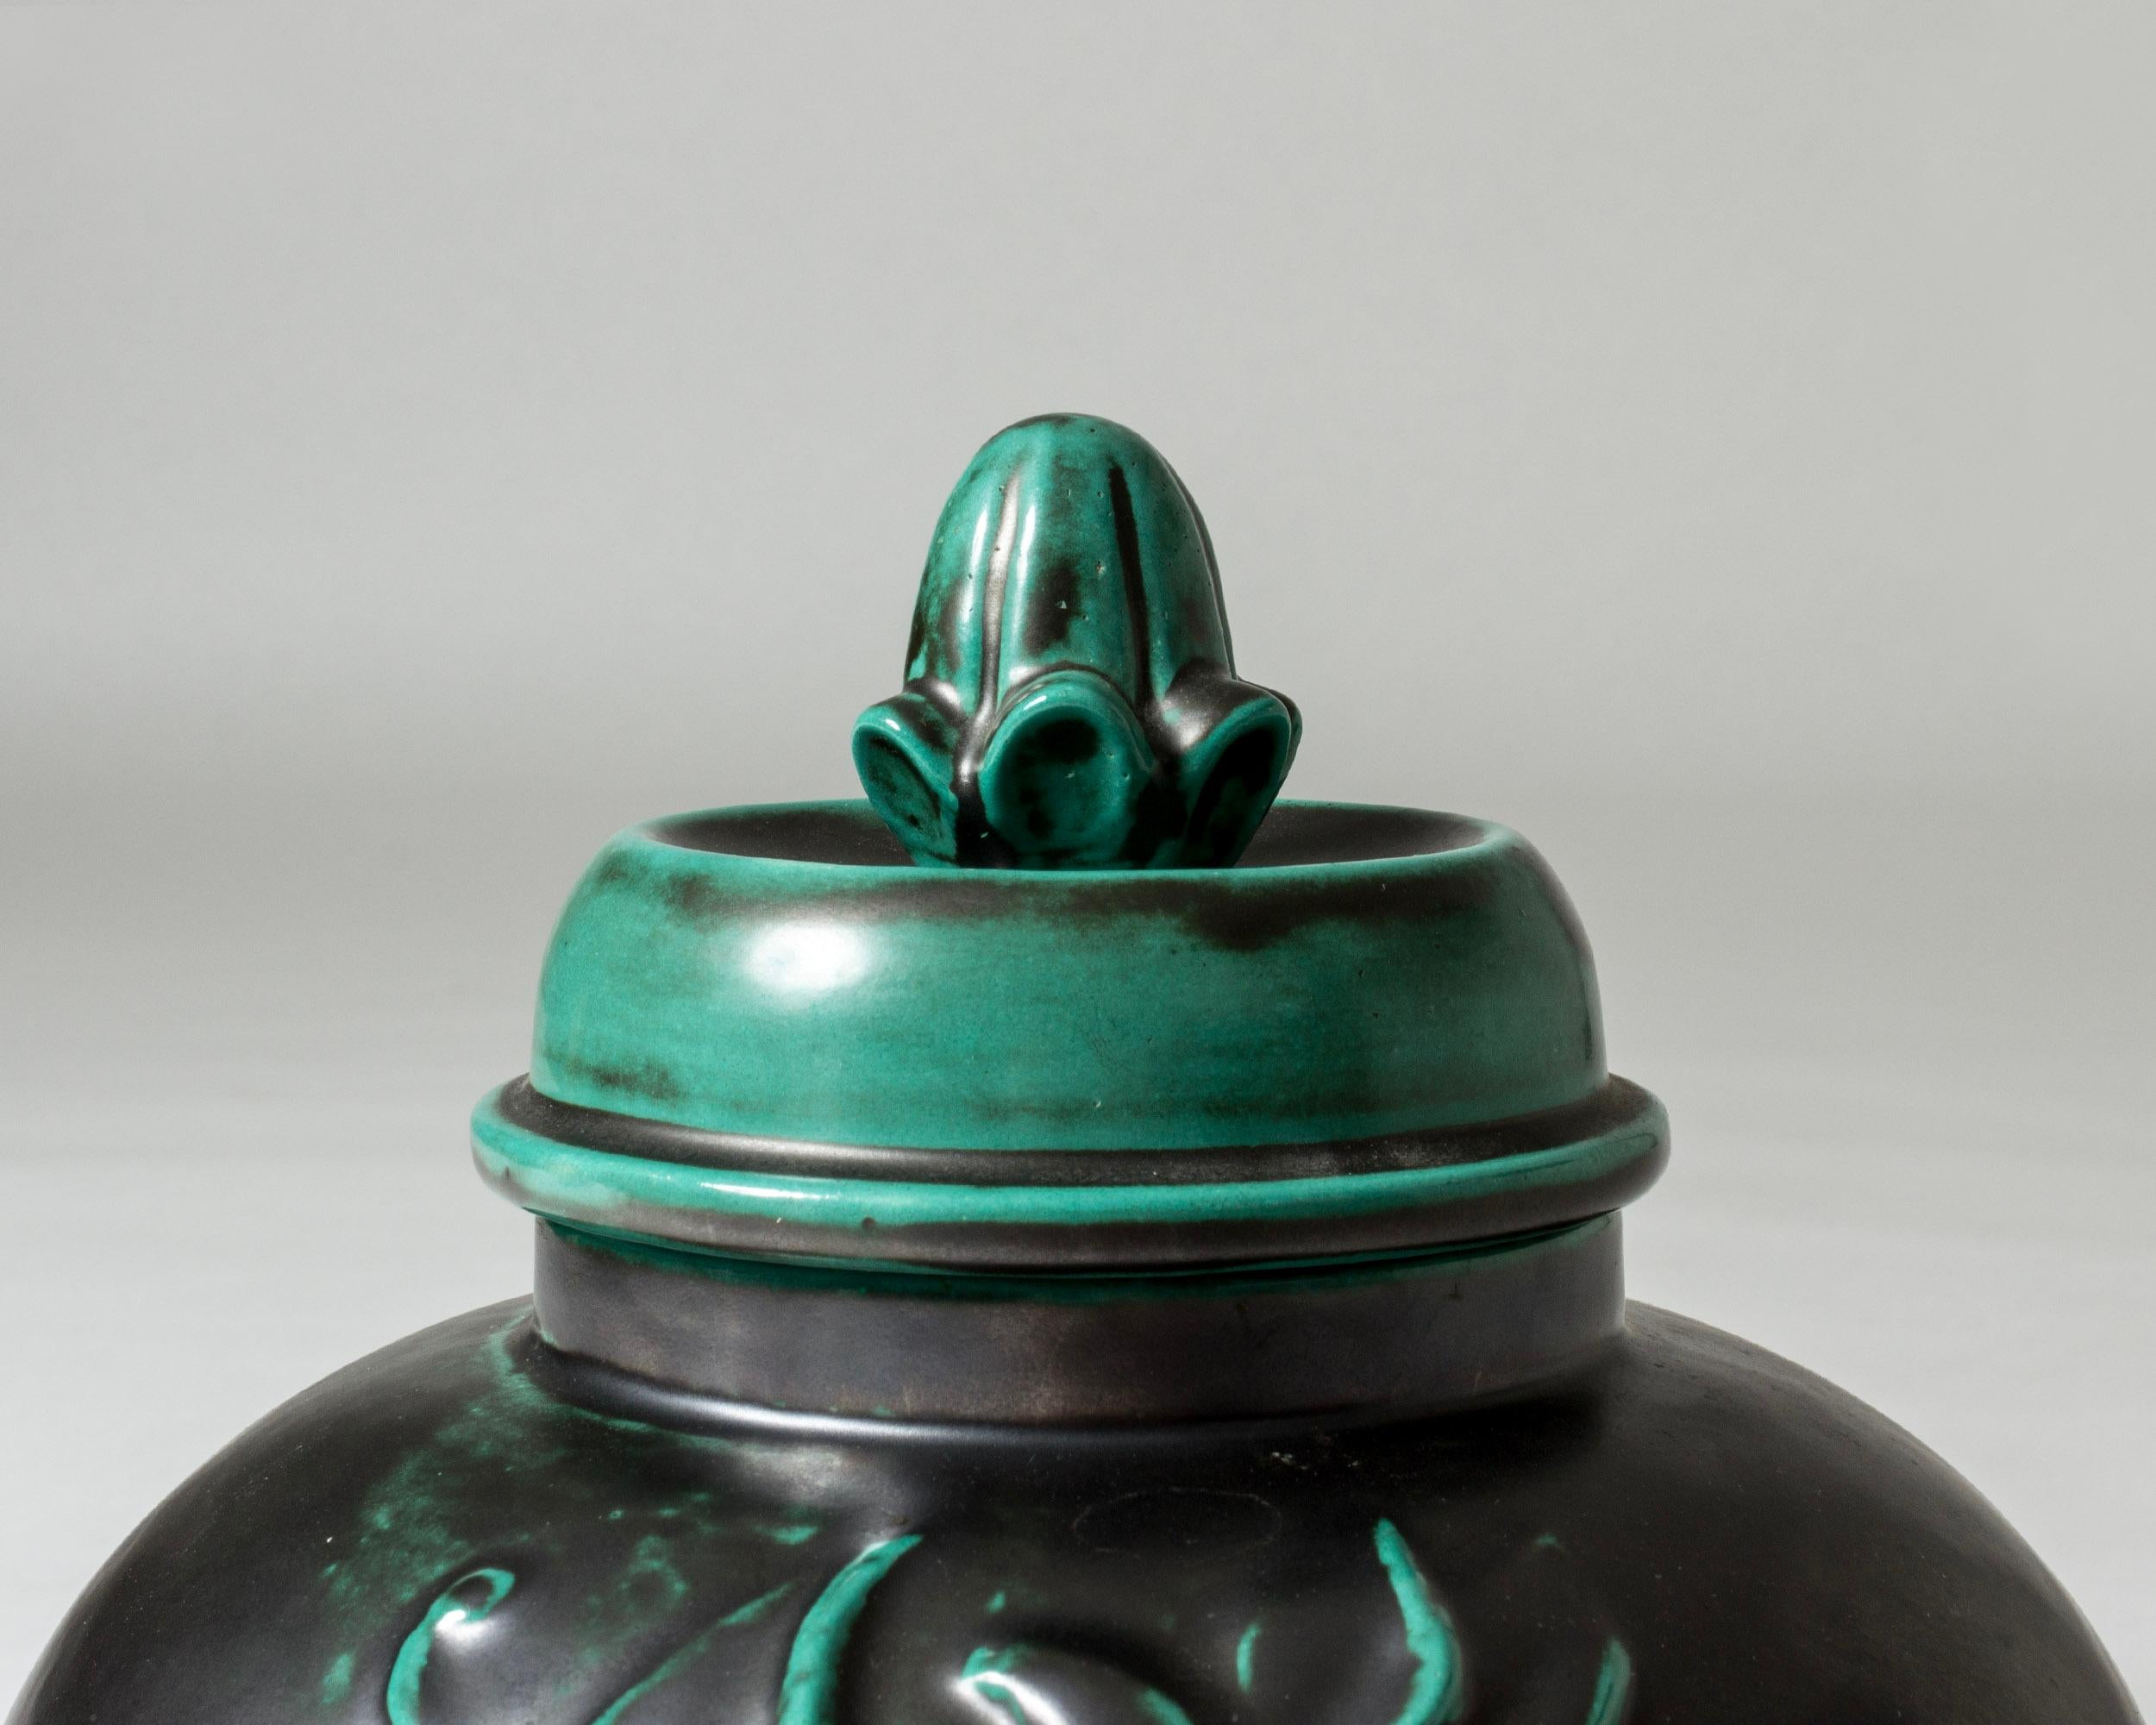 Striking, oversized earthenware jar by Anna-Lisa Thomson. Plump form with an embossed floral motif. Glased deep green with a lighter hue on the lid.